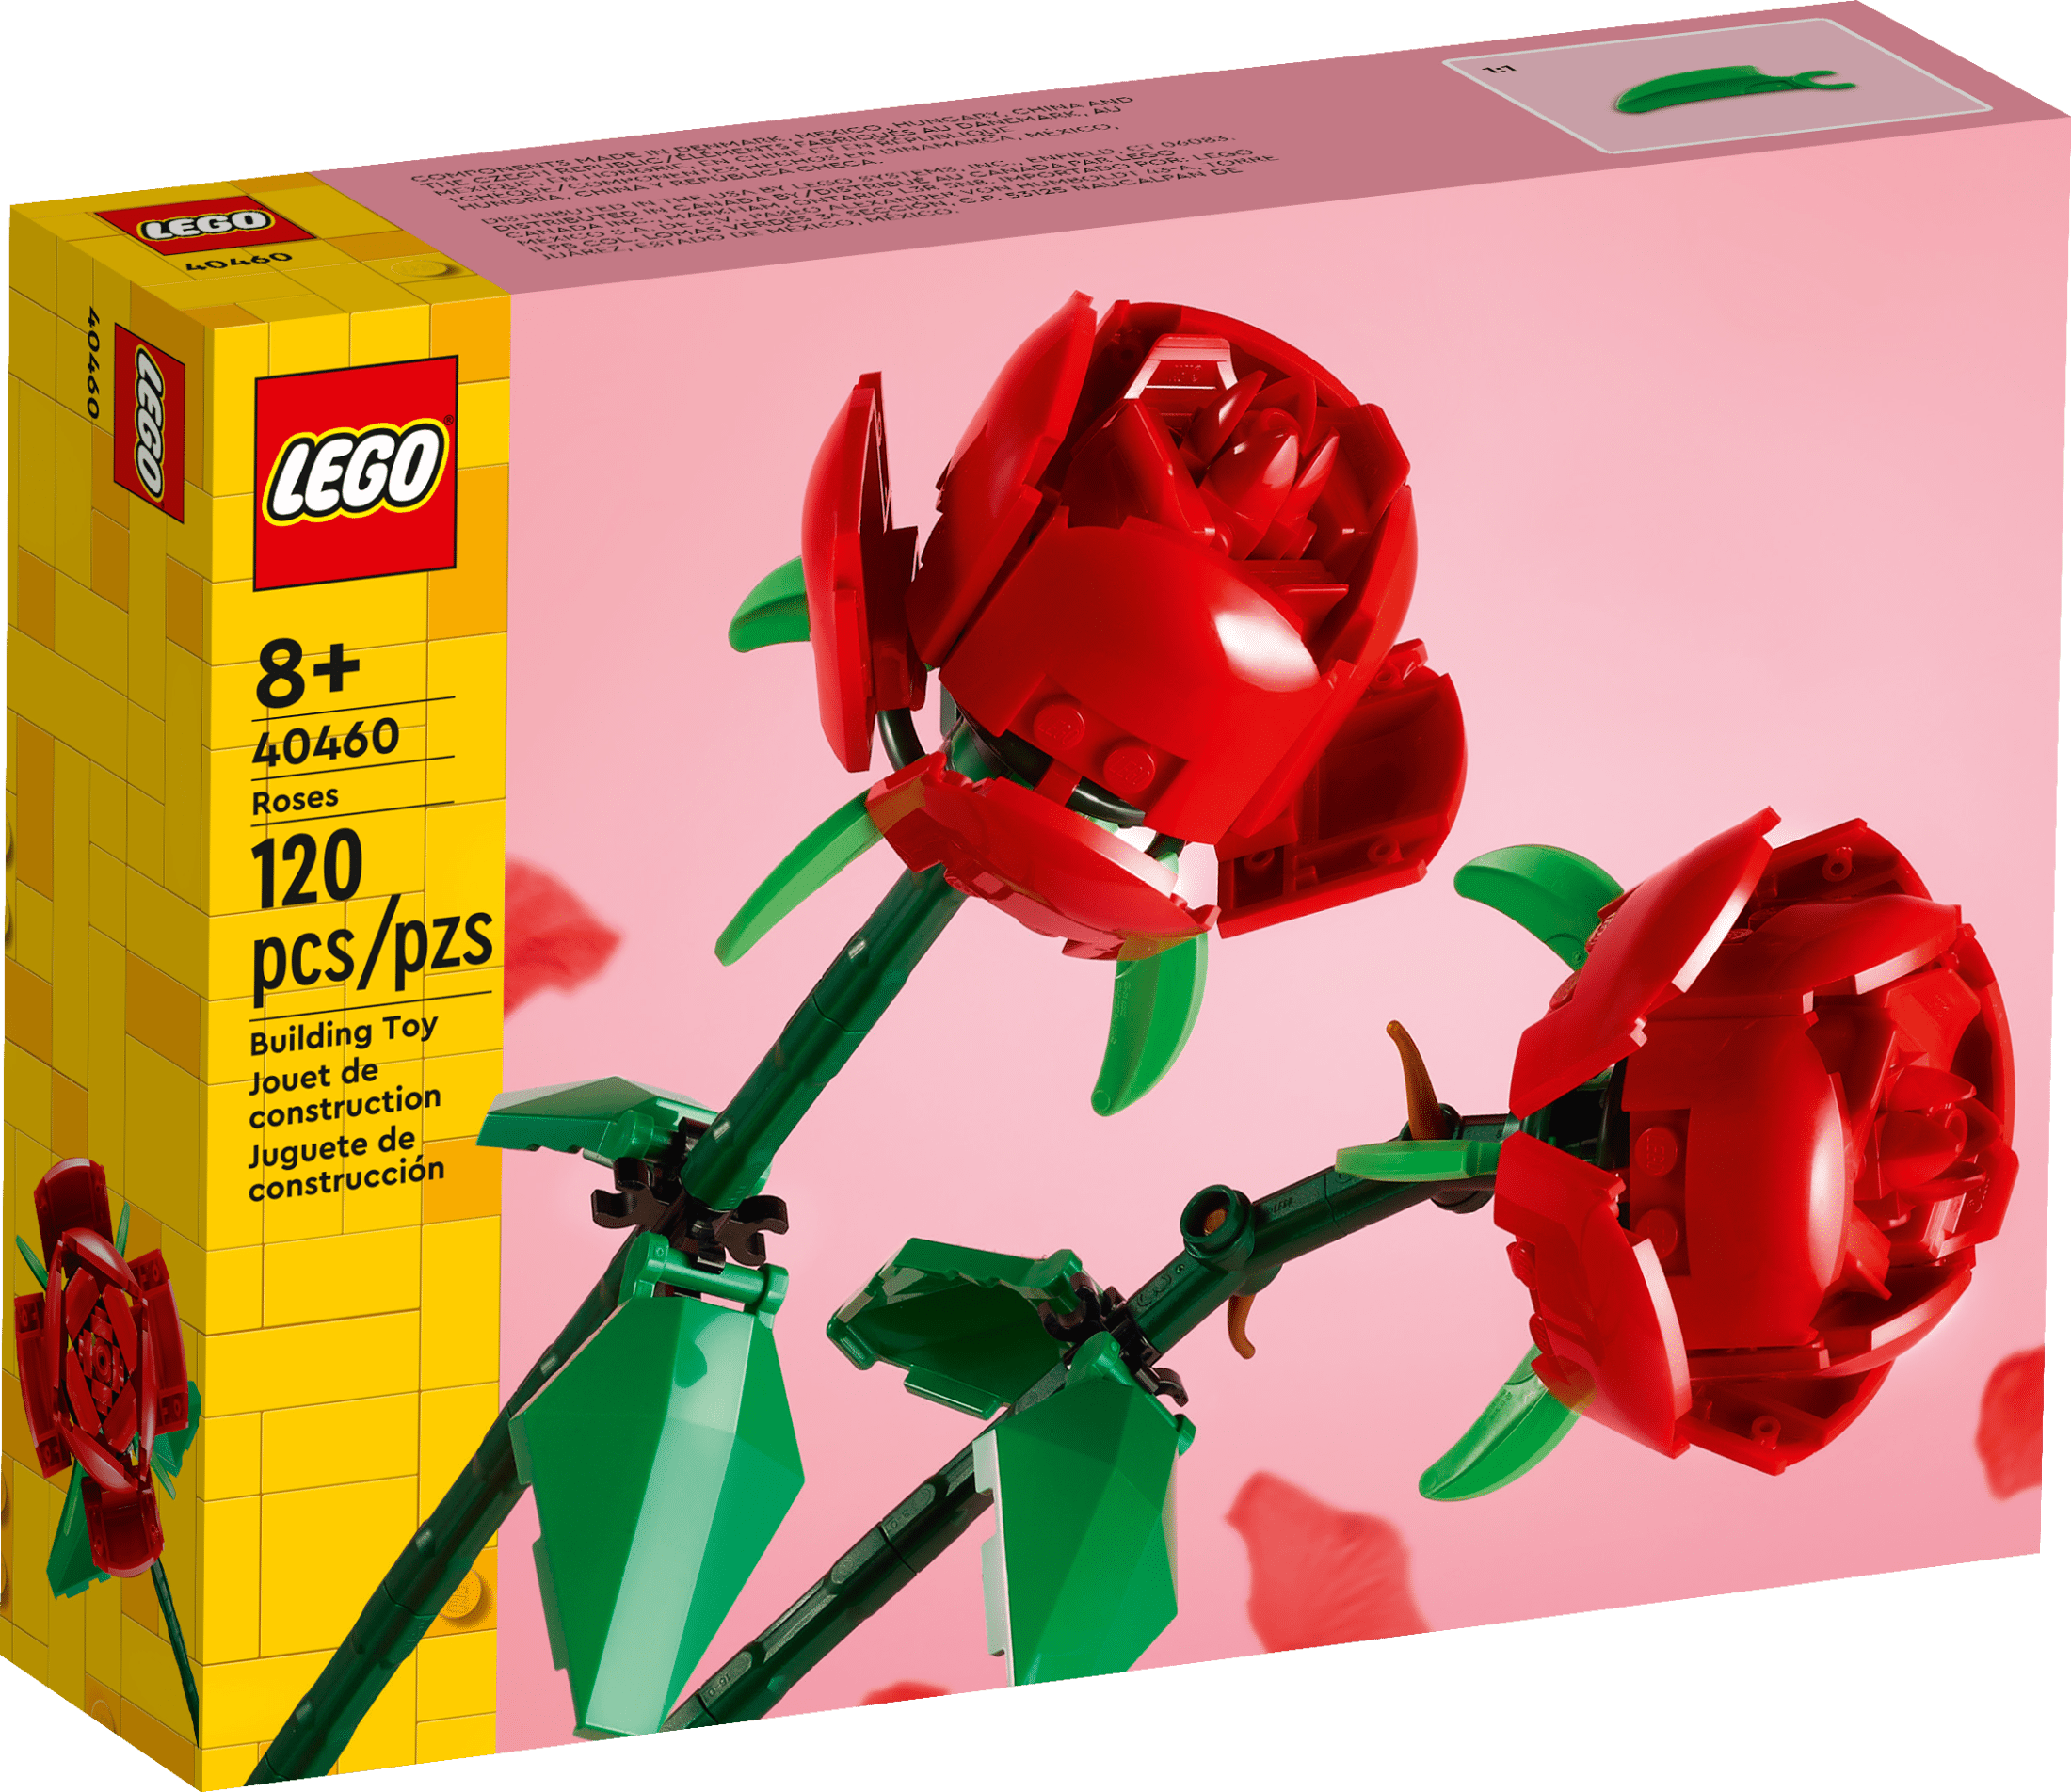 LEGO Icons Bouquet of Roses, Home Décor Artificial Flowers, Gift for Her or  Him for Anniversary and Valentine's Day, Botanical Collection, 10328 